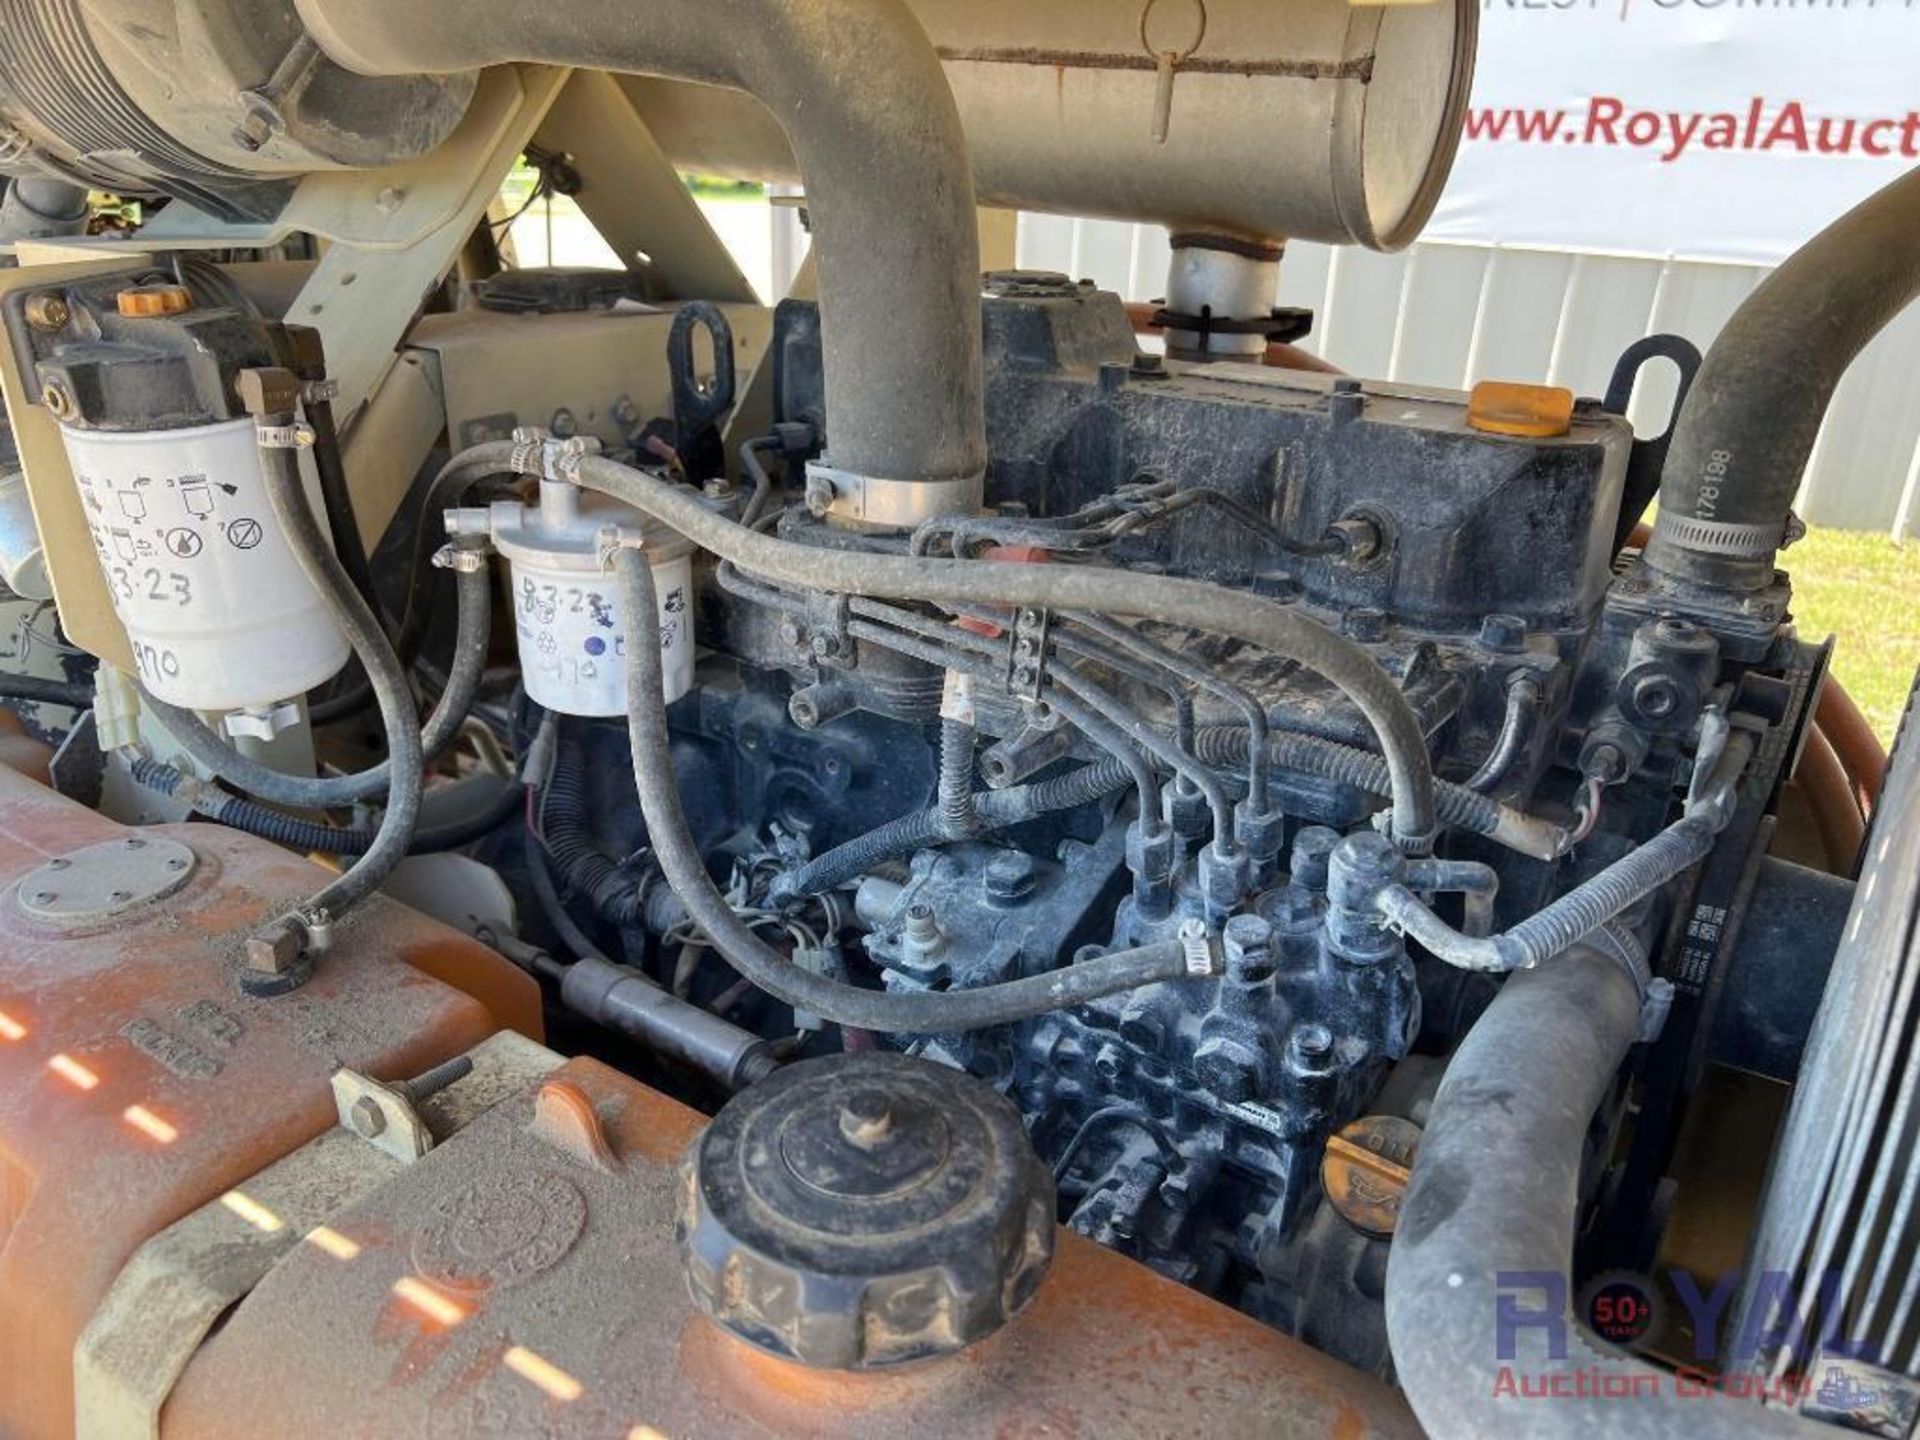 2006 Ingersoll Rand 185 CFM Towable Air Compressor - Image 18 of 24